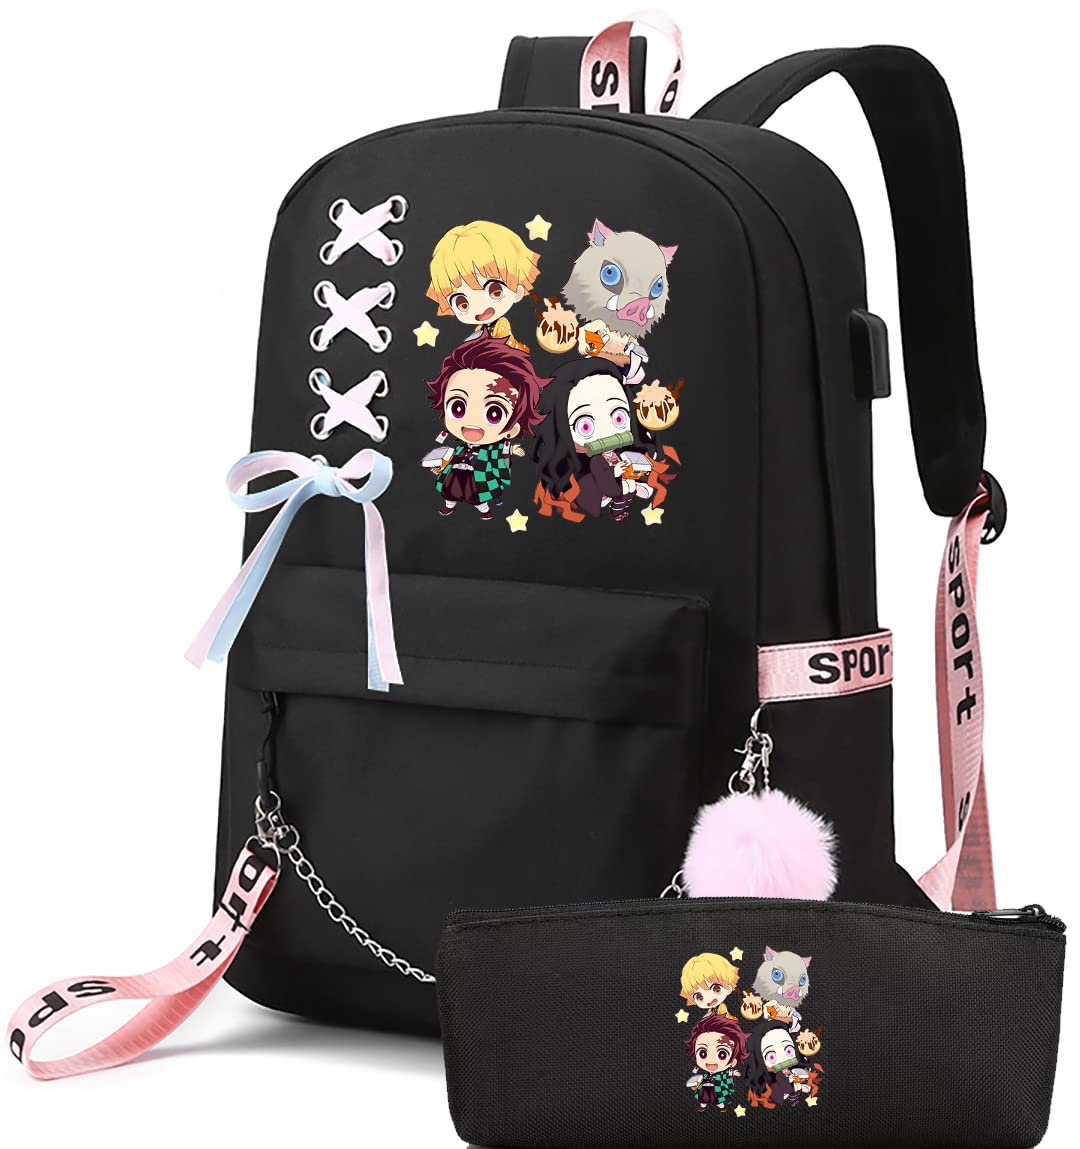 Girls Anime Backpack Purse for Sale in El Paso, TX - OfferUp